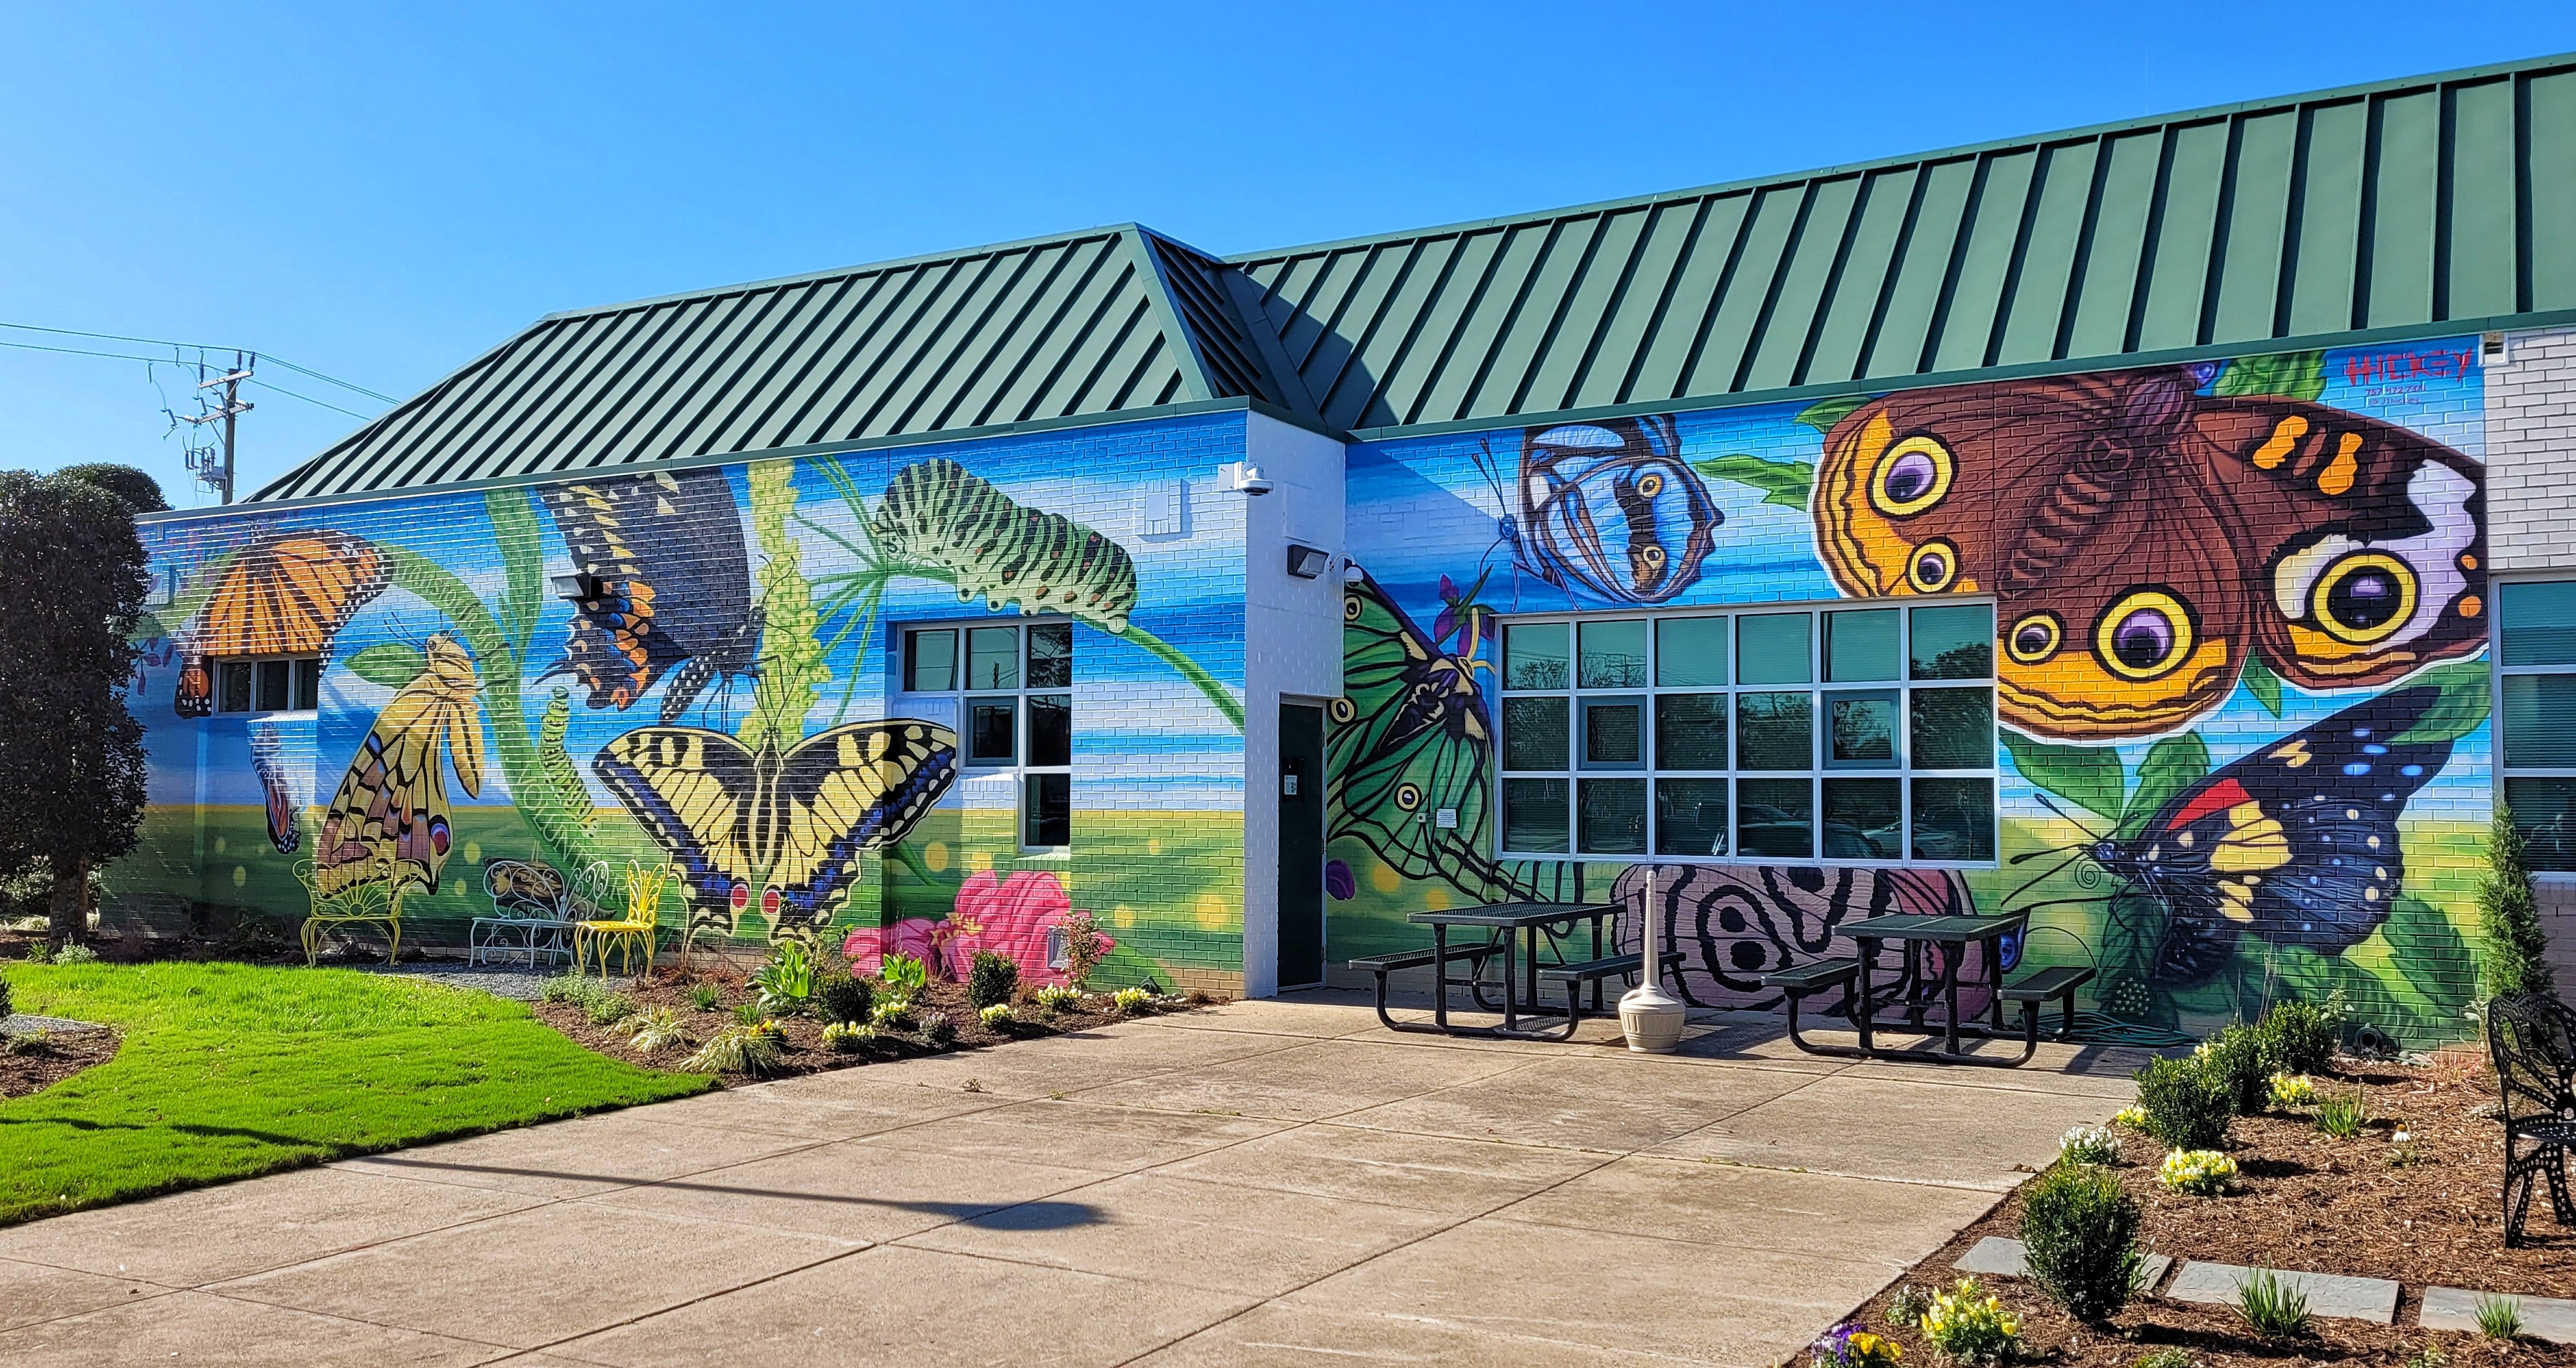 ViBe Creative District Photo Tour: The Murals